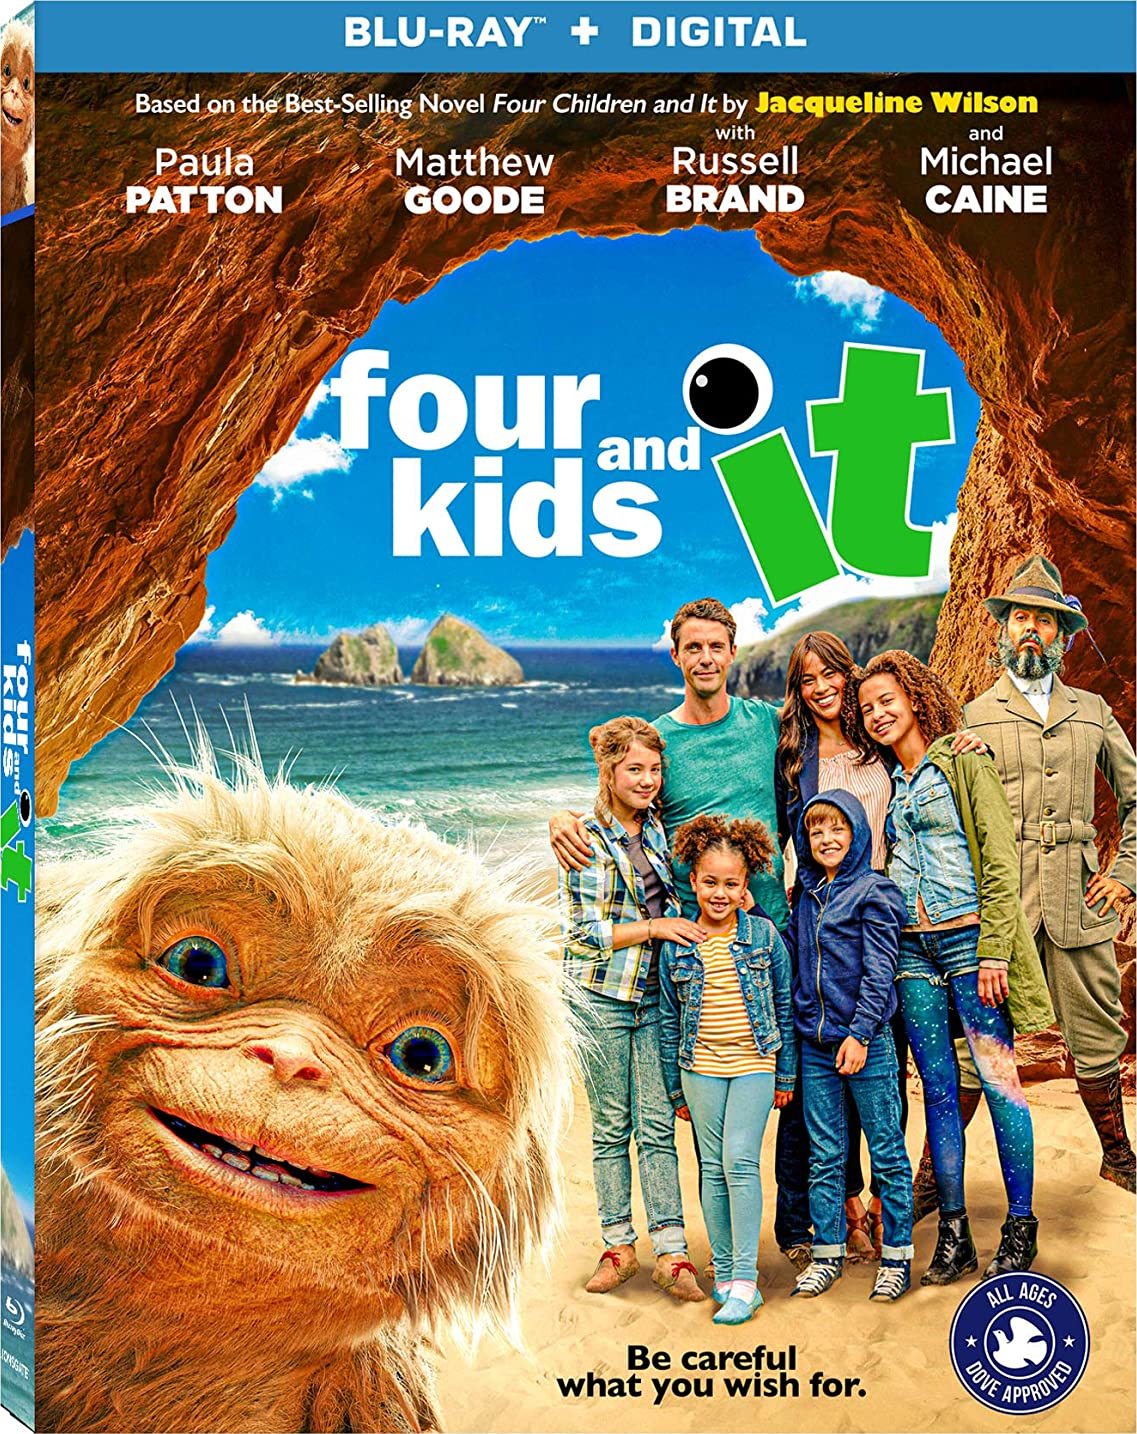 Four Kids And It Blu Ray Release Date June 30 Blu Ray Digital